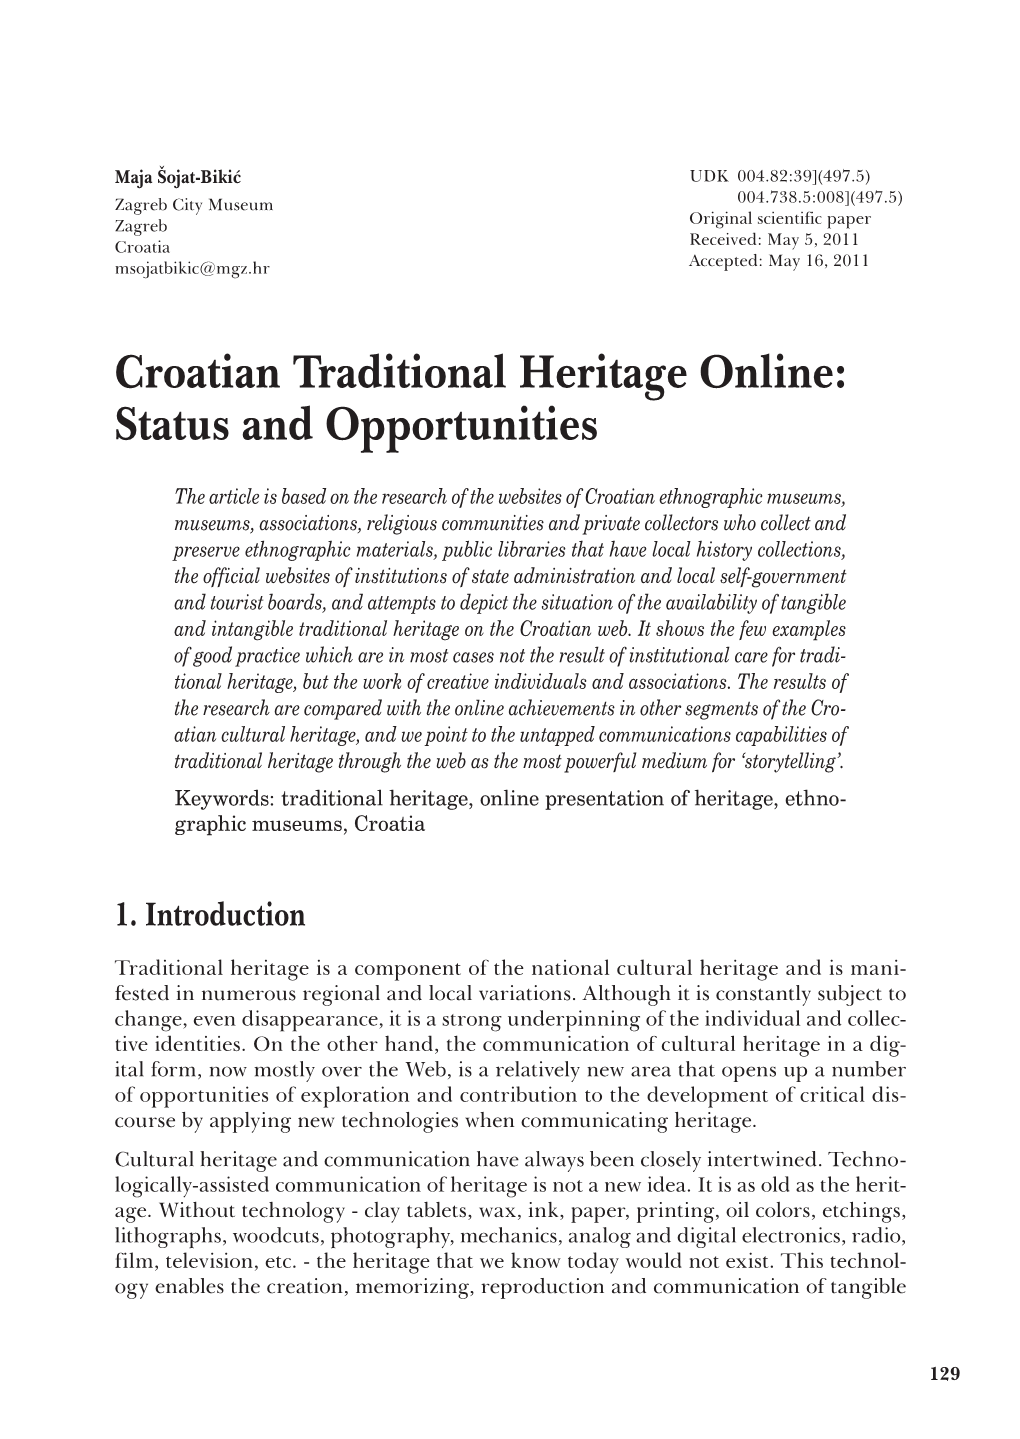 Croatian Traditional Heritage Online: Status and Opportunities